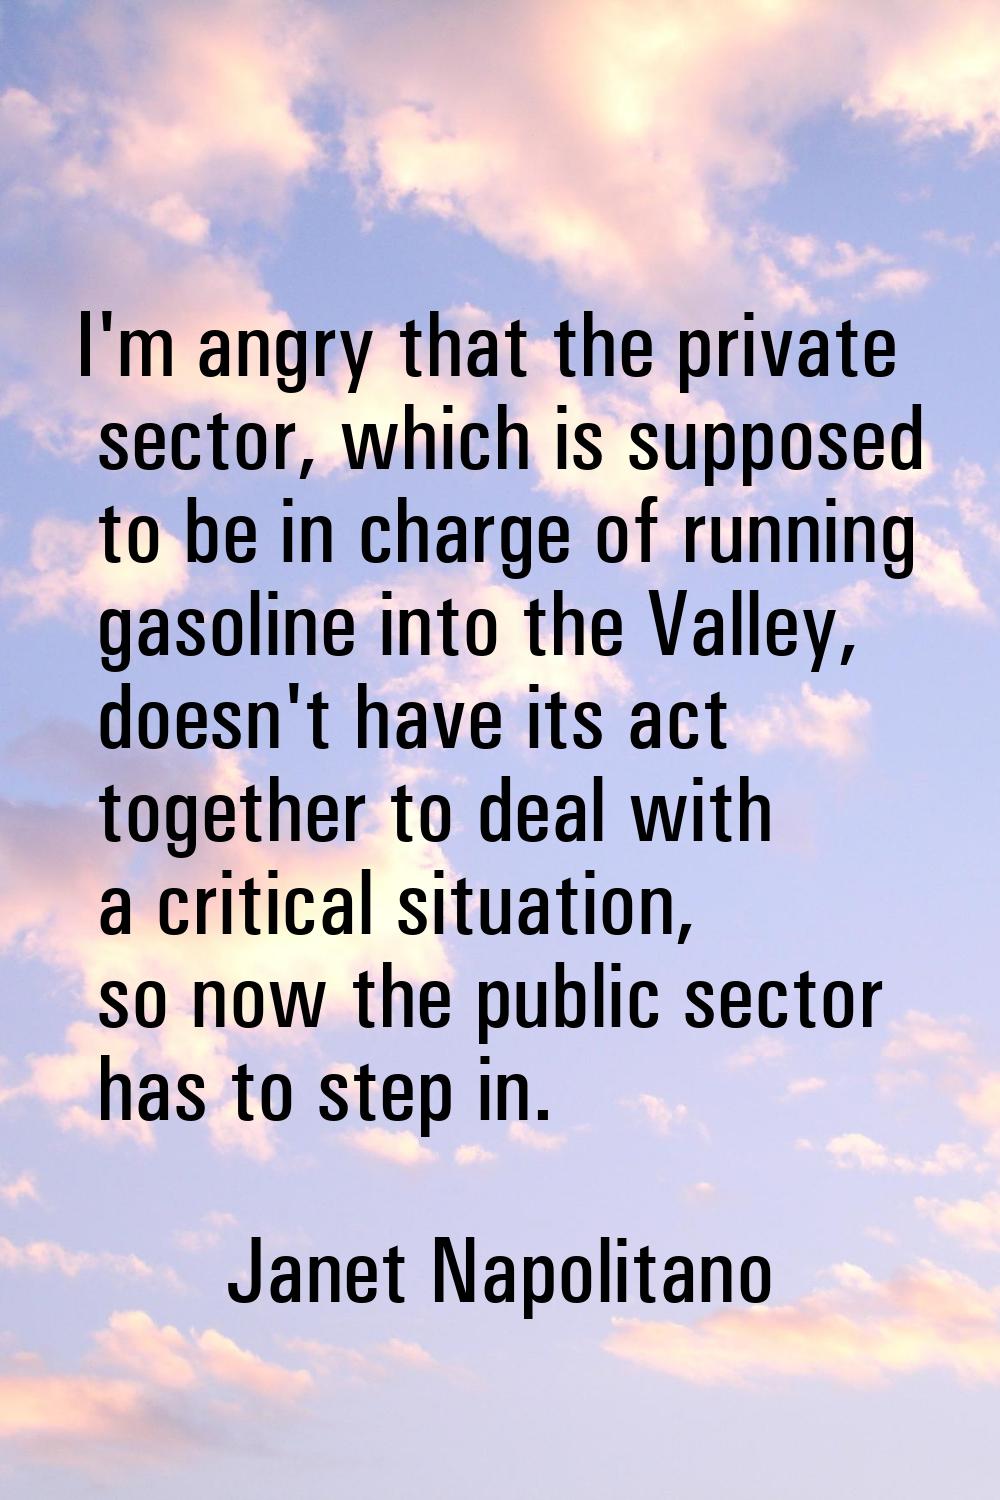 I'm angry that the private sector, which is supposed to be in charge of running gasoline into the V